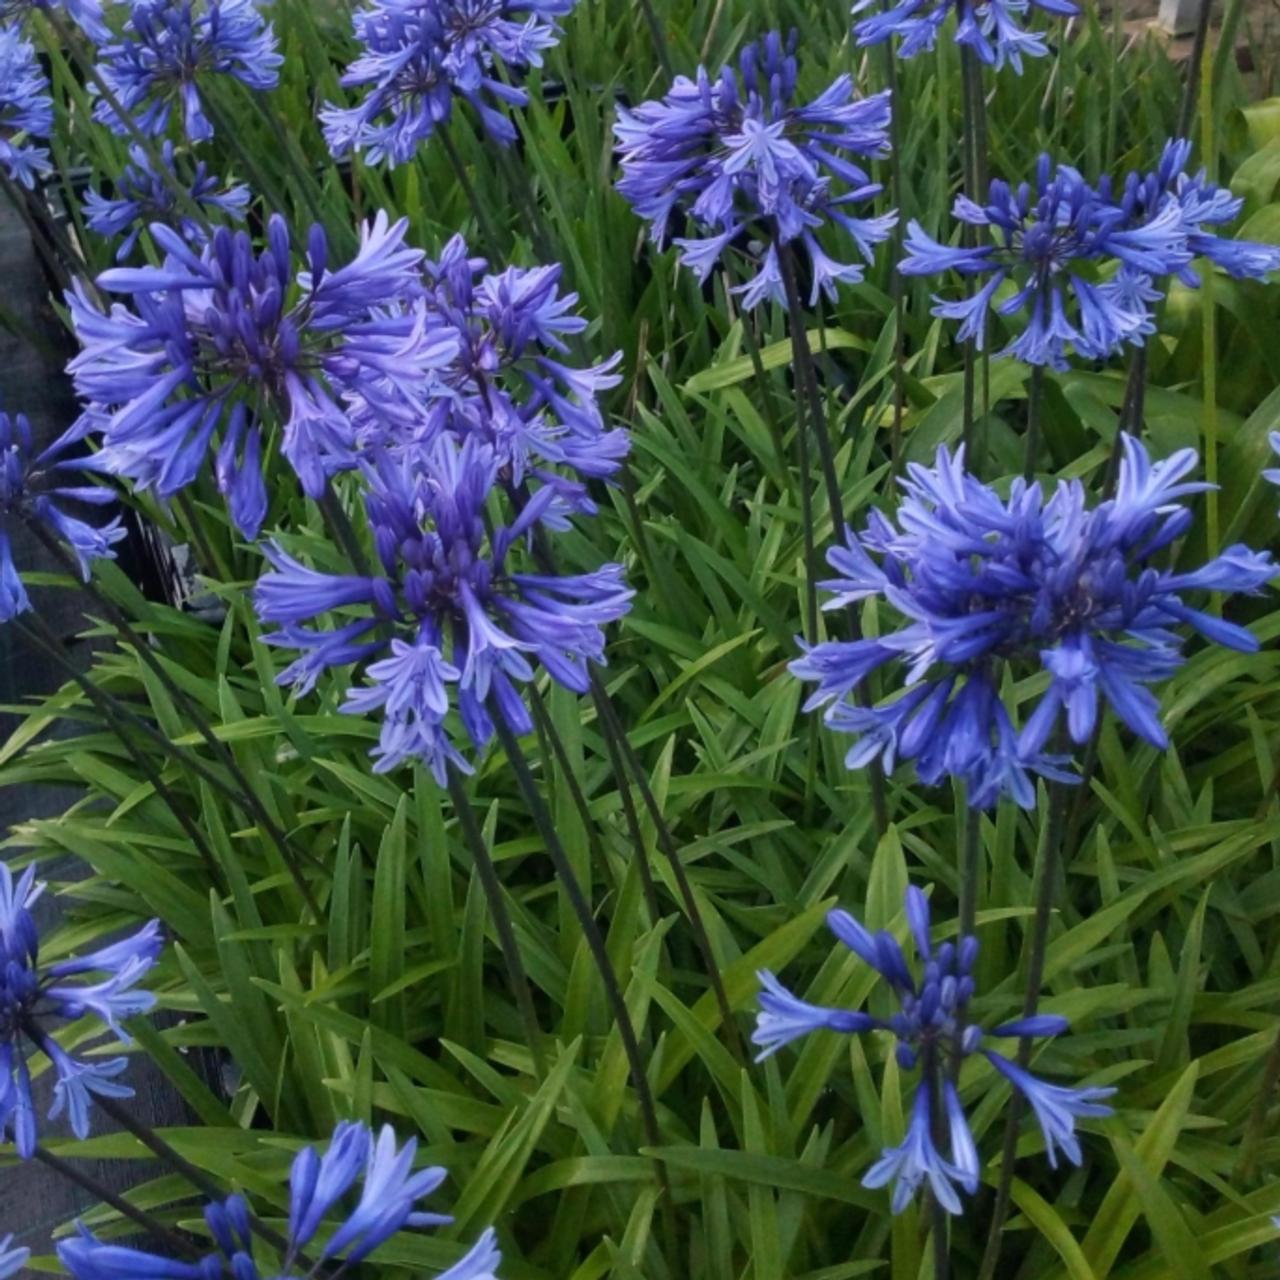 Agapanthus 'African Queen' plant